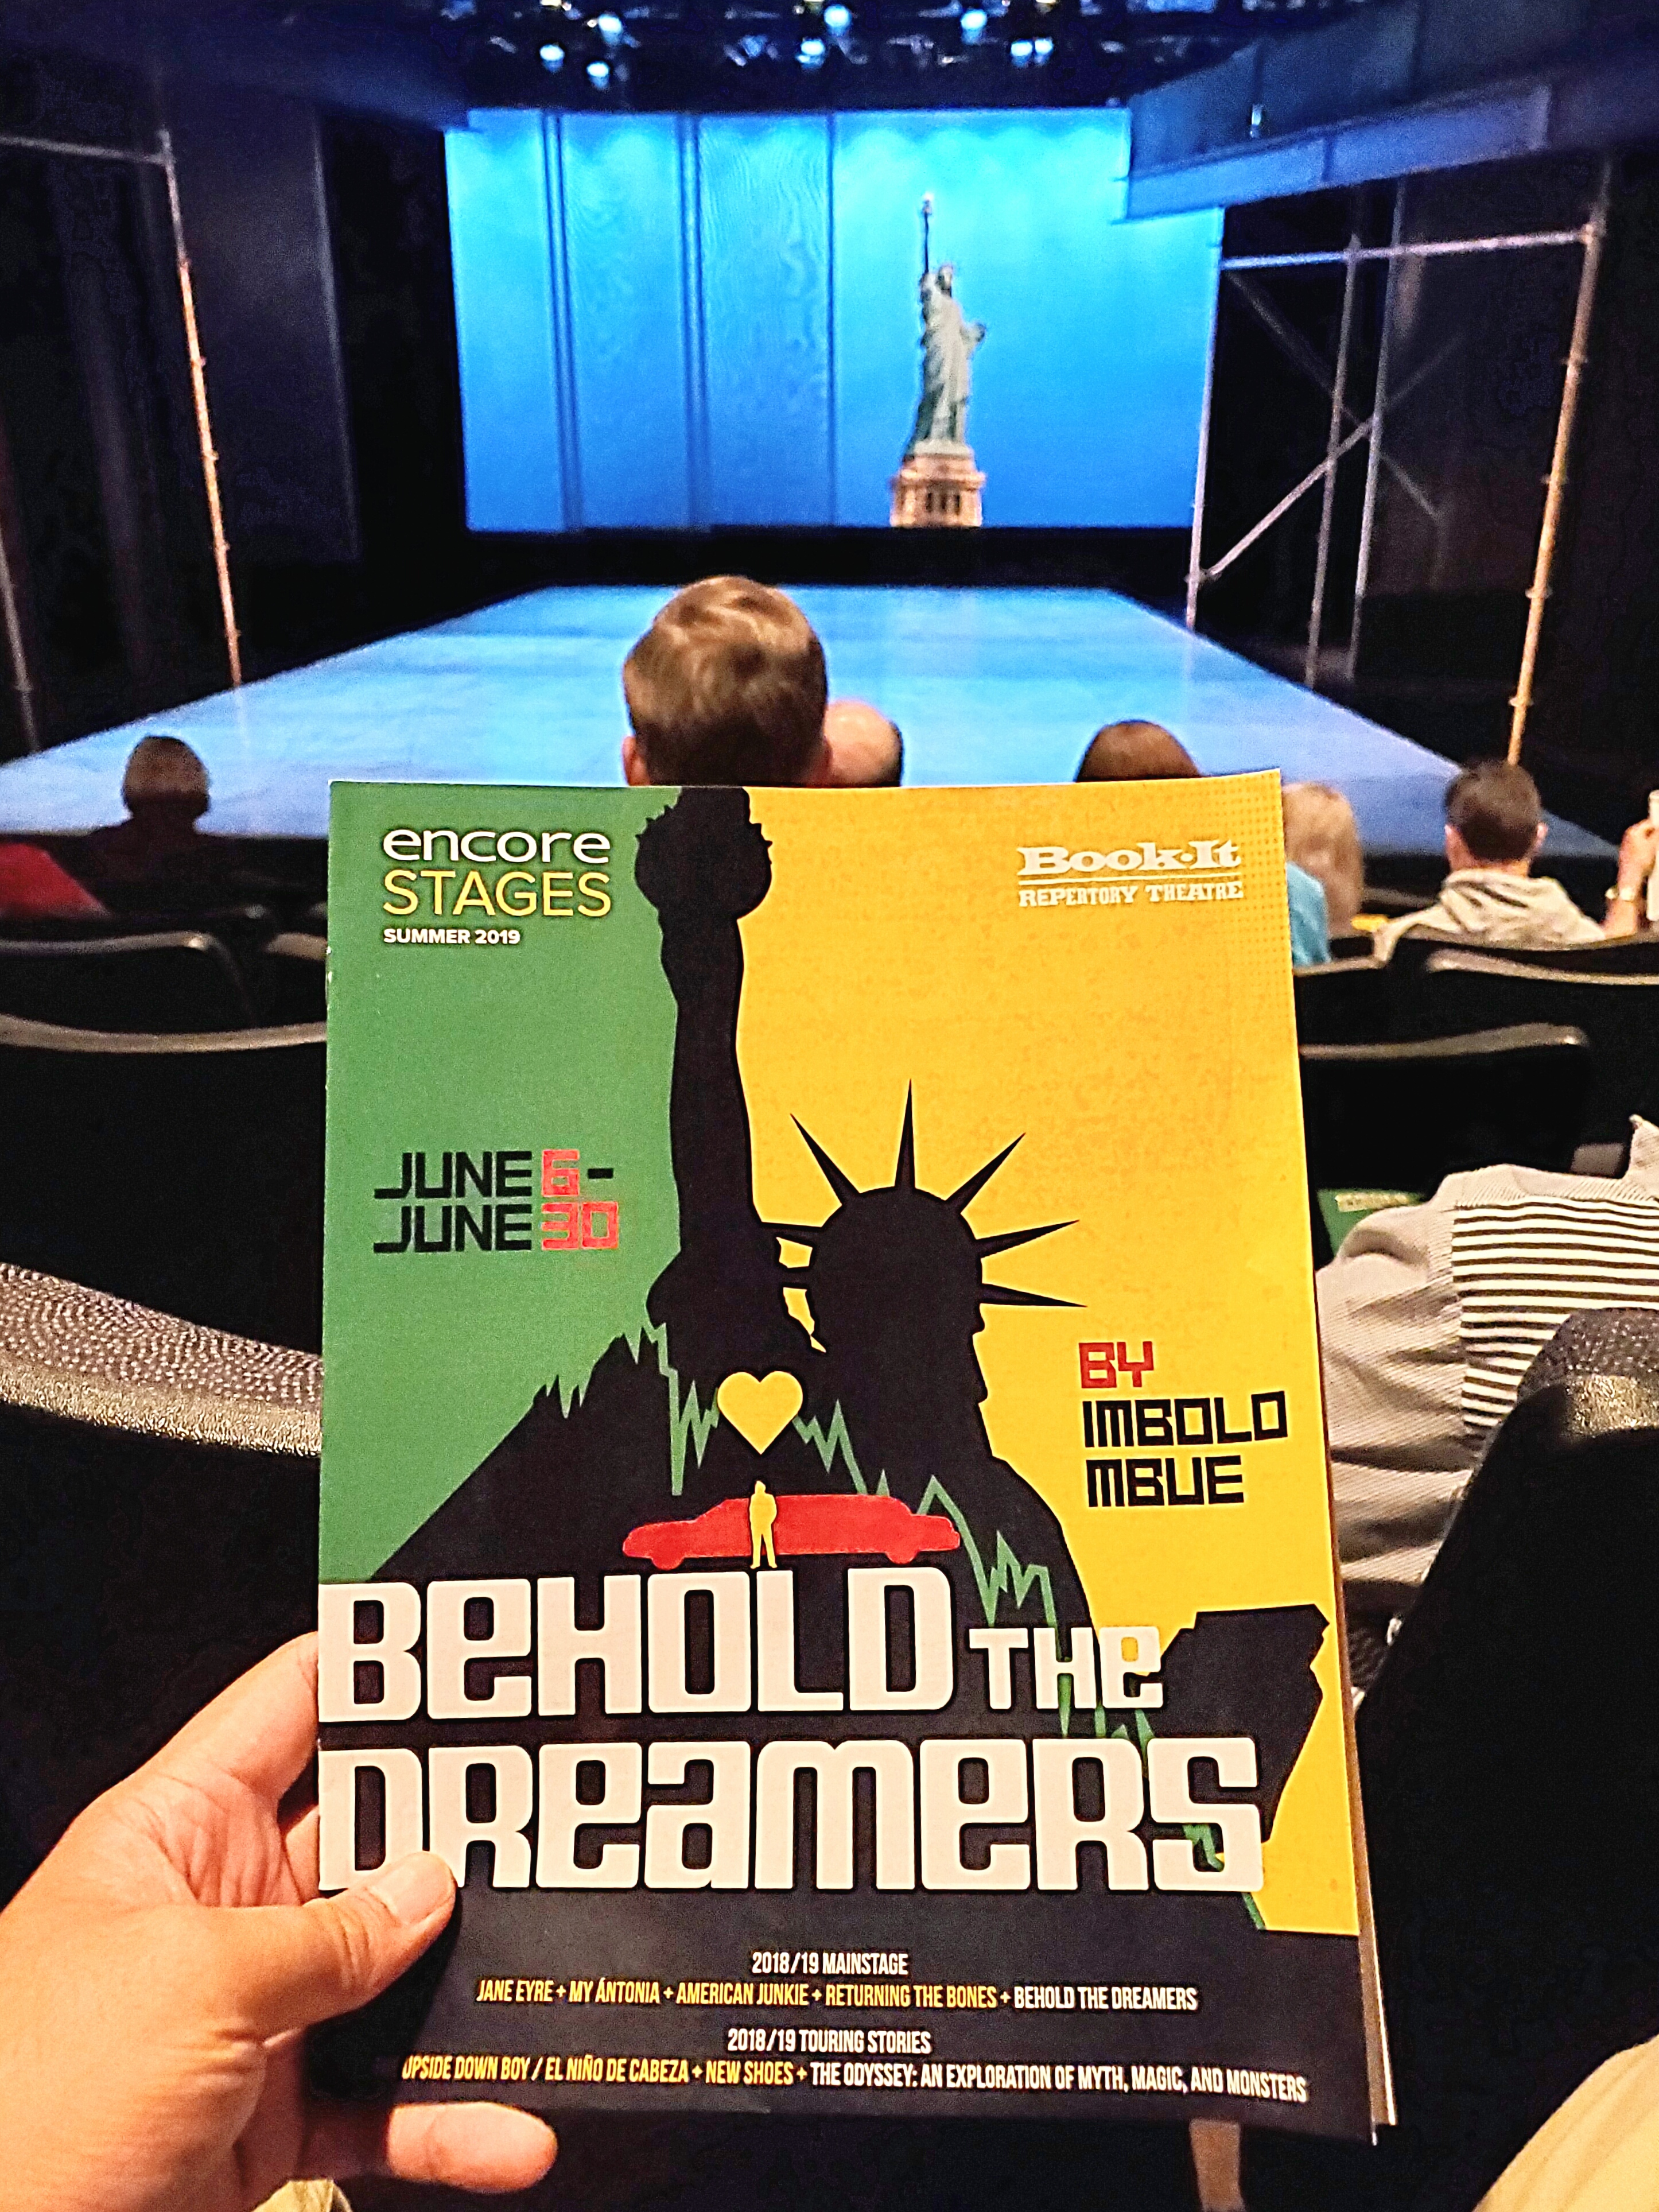 #Stage #play adaptation of Behold the Dreamers at Book-It Repertory Theatre. Well-written captivating storytelling. Reminds me of the sacrifices my #immigrant parents made to achieve the #AmericanDream. Loved the juxtaposition between the rich & poor. Surprised that so many seats were empty at such a good play.